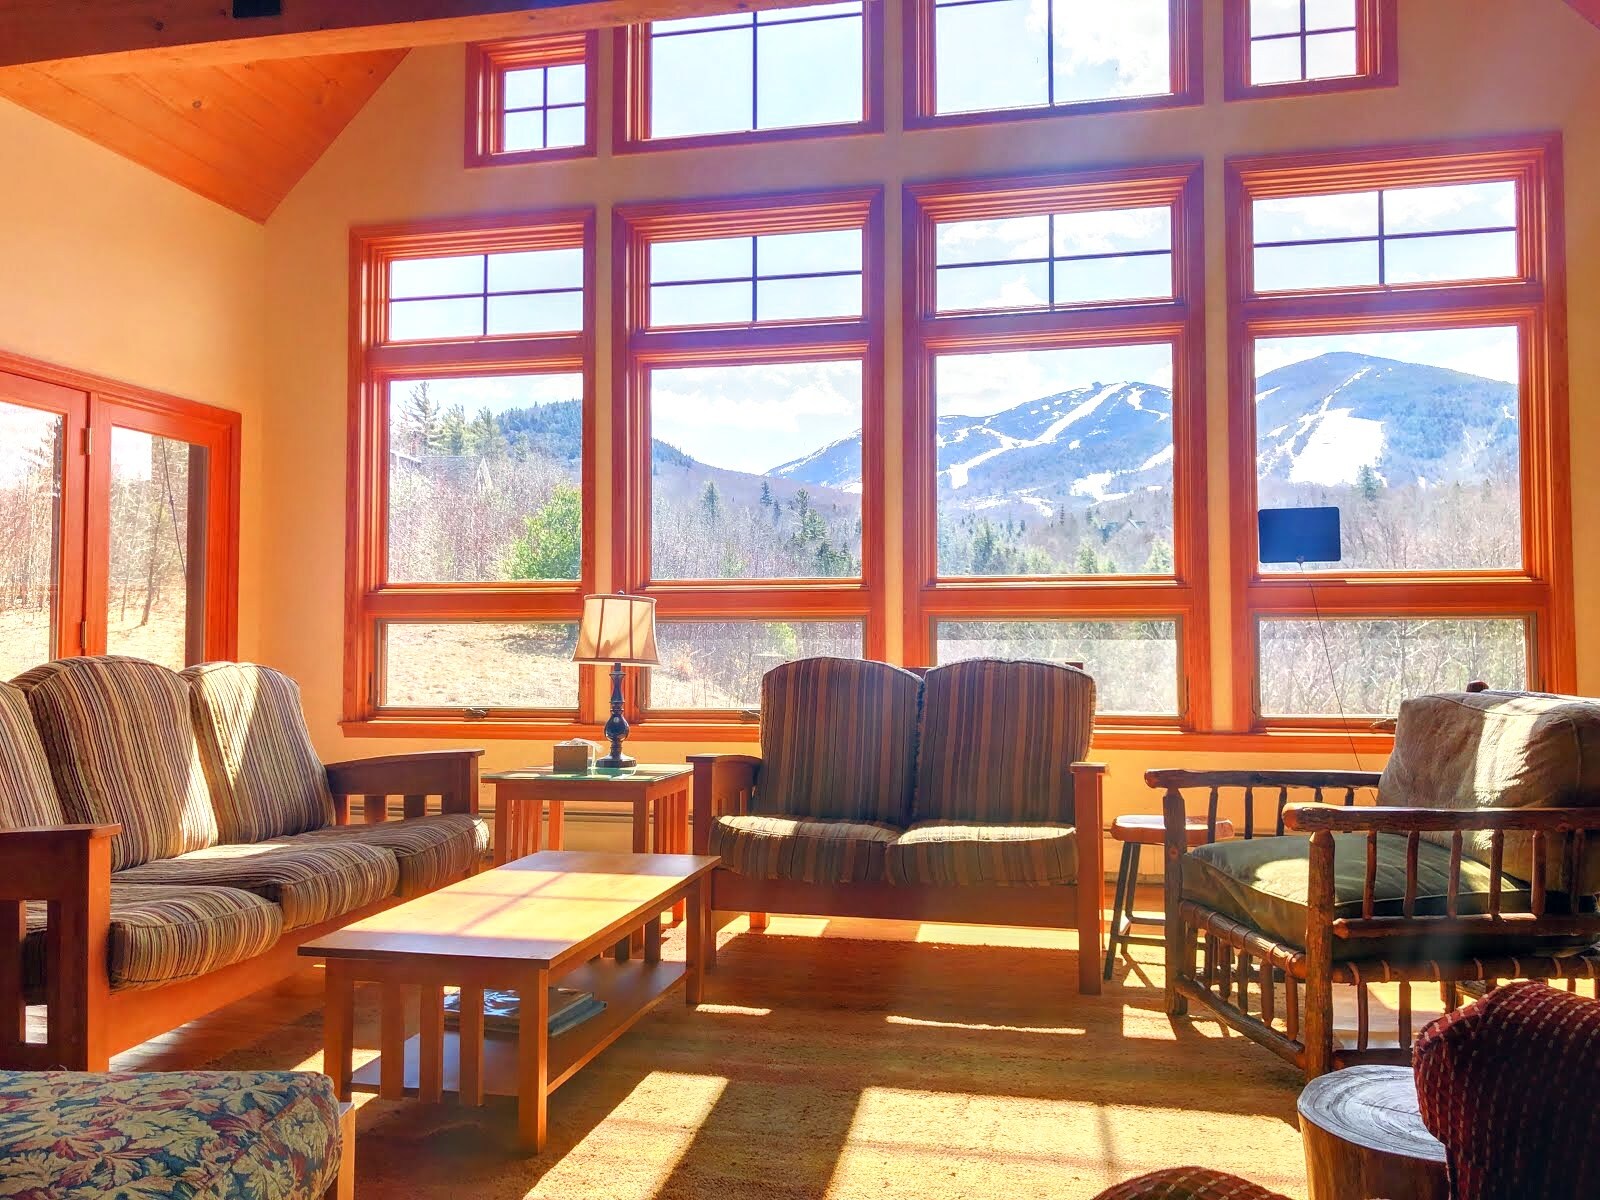 The beautiful rustic furniture perfectly positioned to soak in the majesty of Cannon Mountain and the Kinsman Range towering right in front of you.